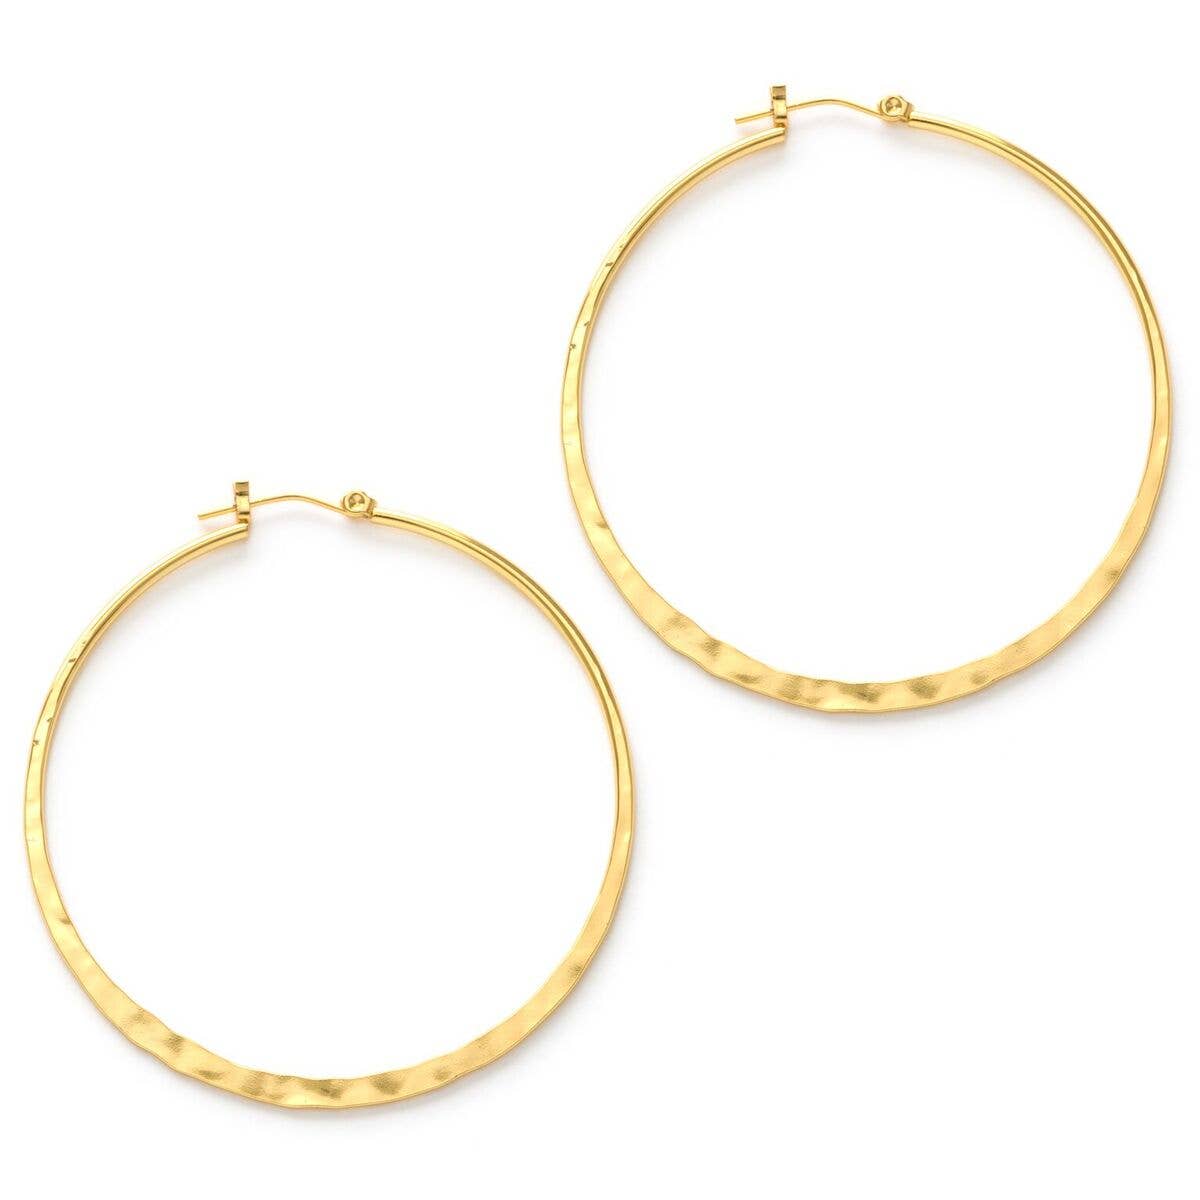 1.5" Hammered Hoops - Gold